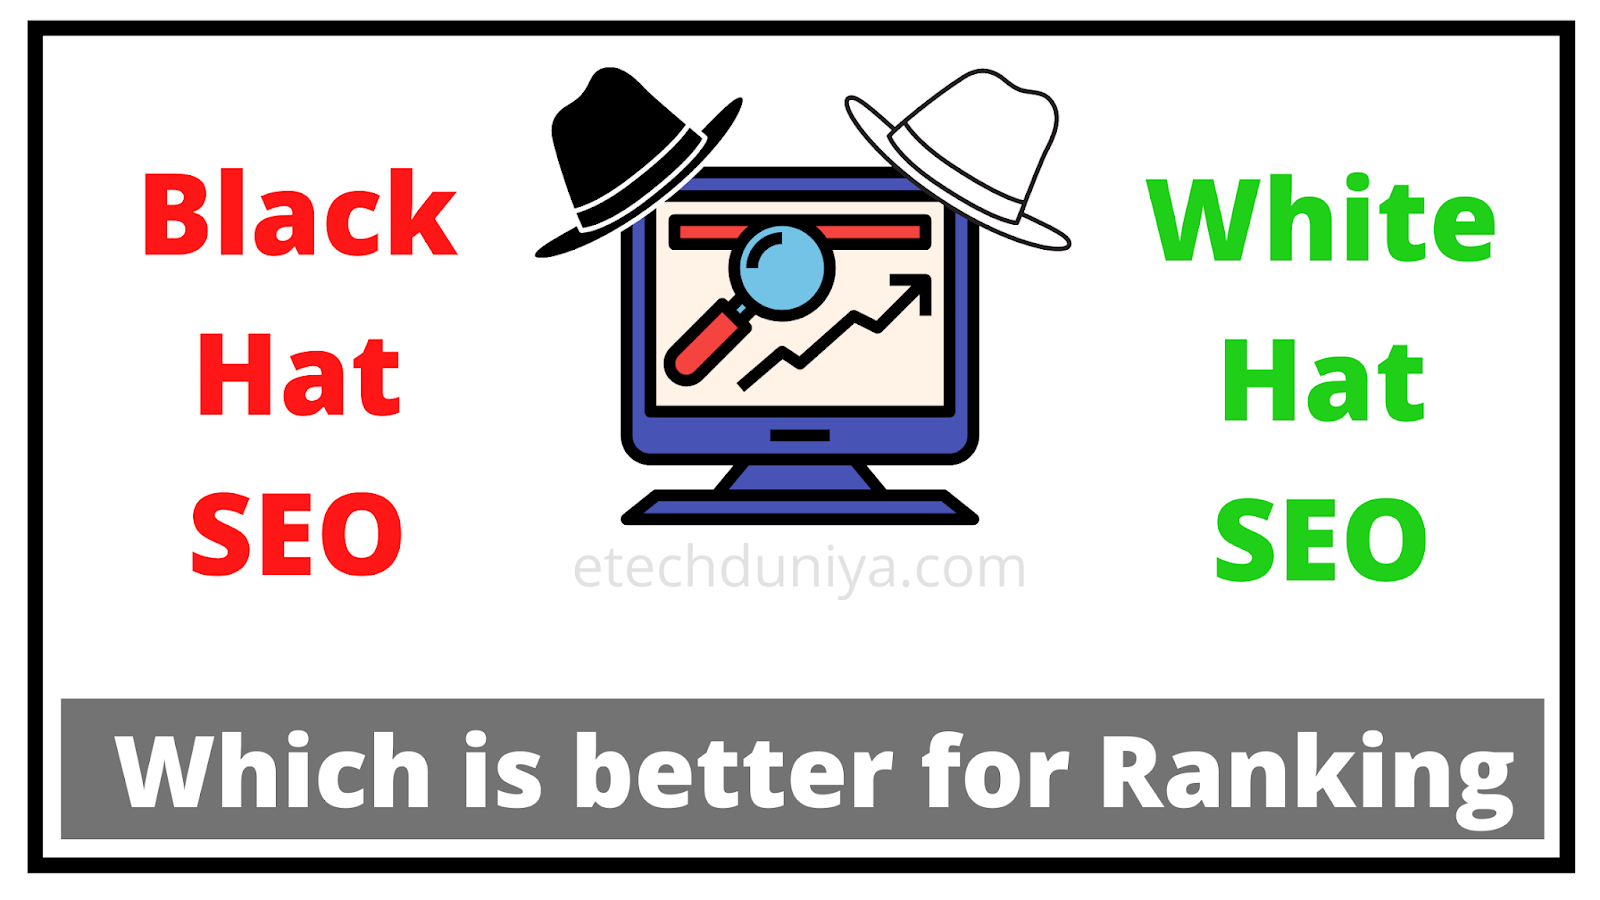 White hat and Black hat SEO strategies, Which is better for ranking